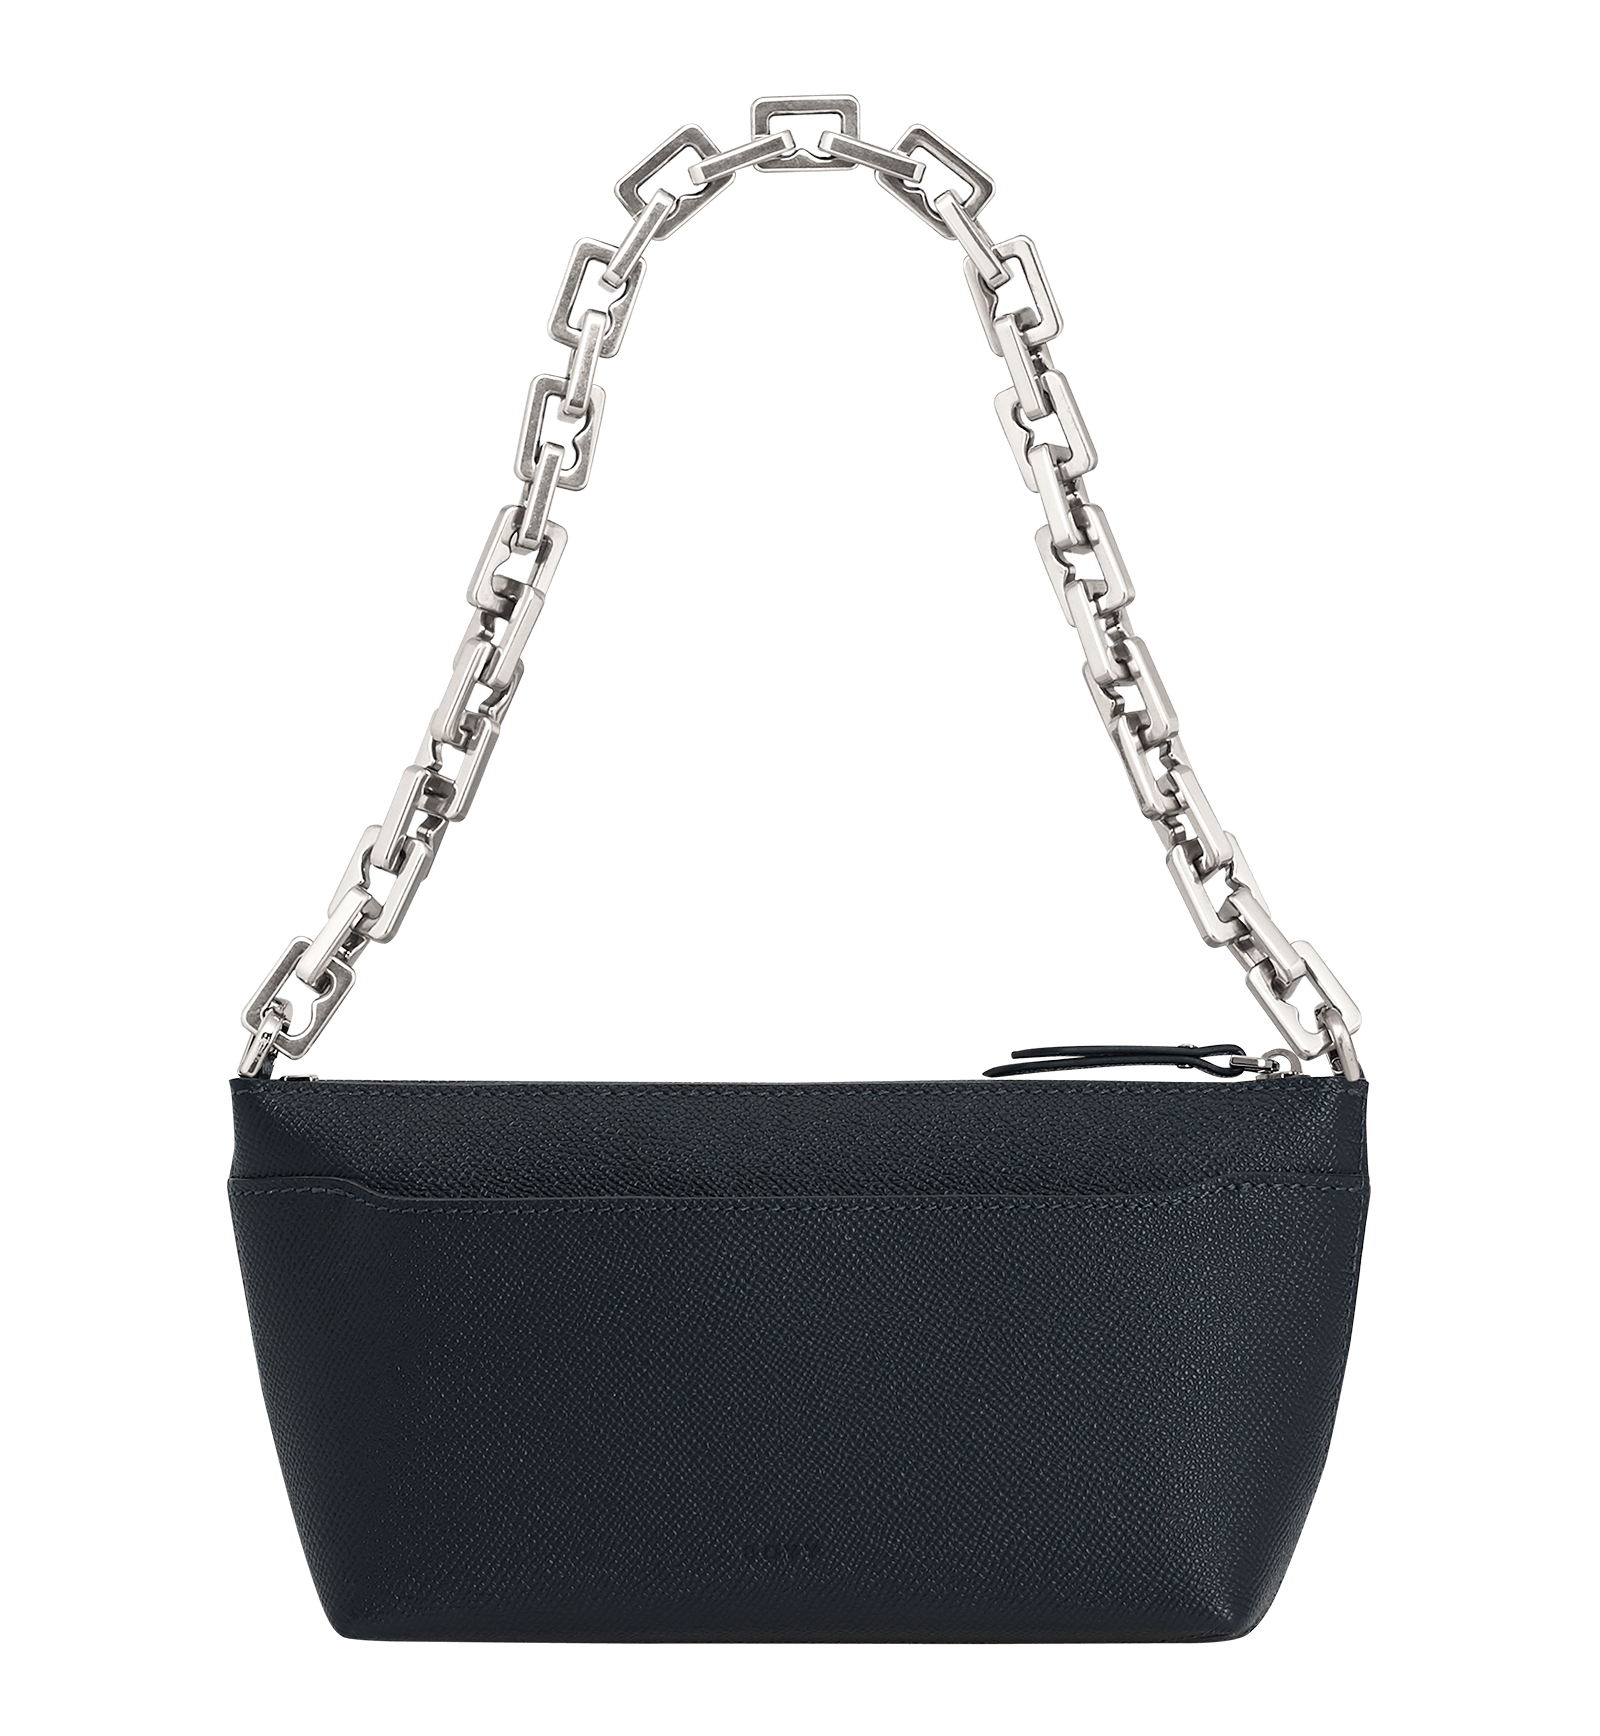 Small, blue shoulder bag with a large silver buckle on the front, Made with grained calfskin leather.